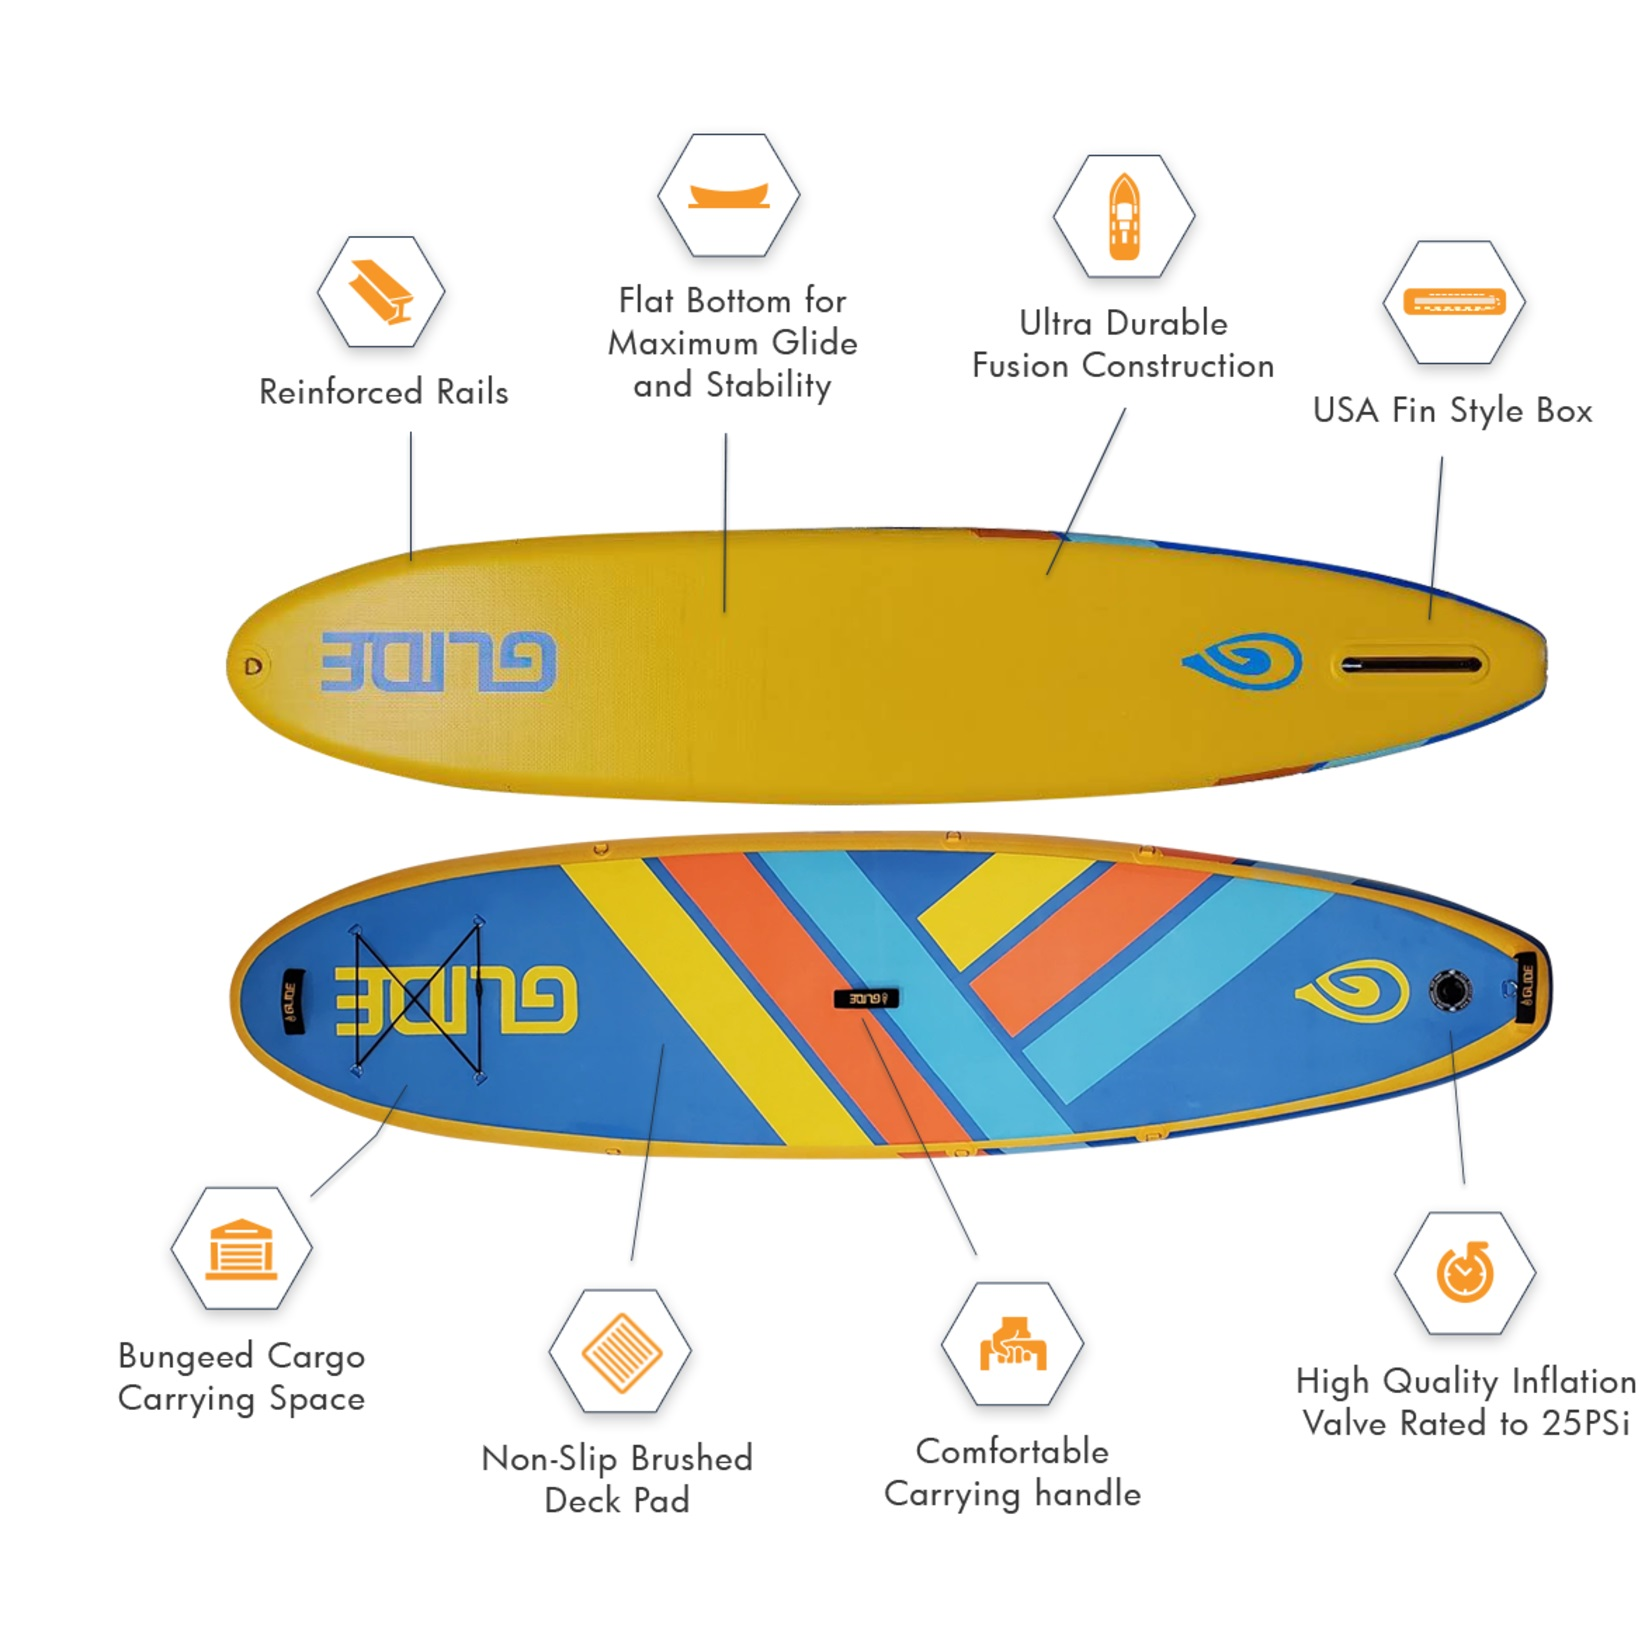 other boards like the roc inflatable paddle board cant compare to our inflatable boards